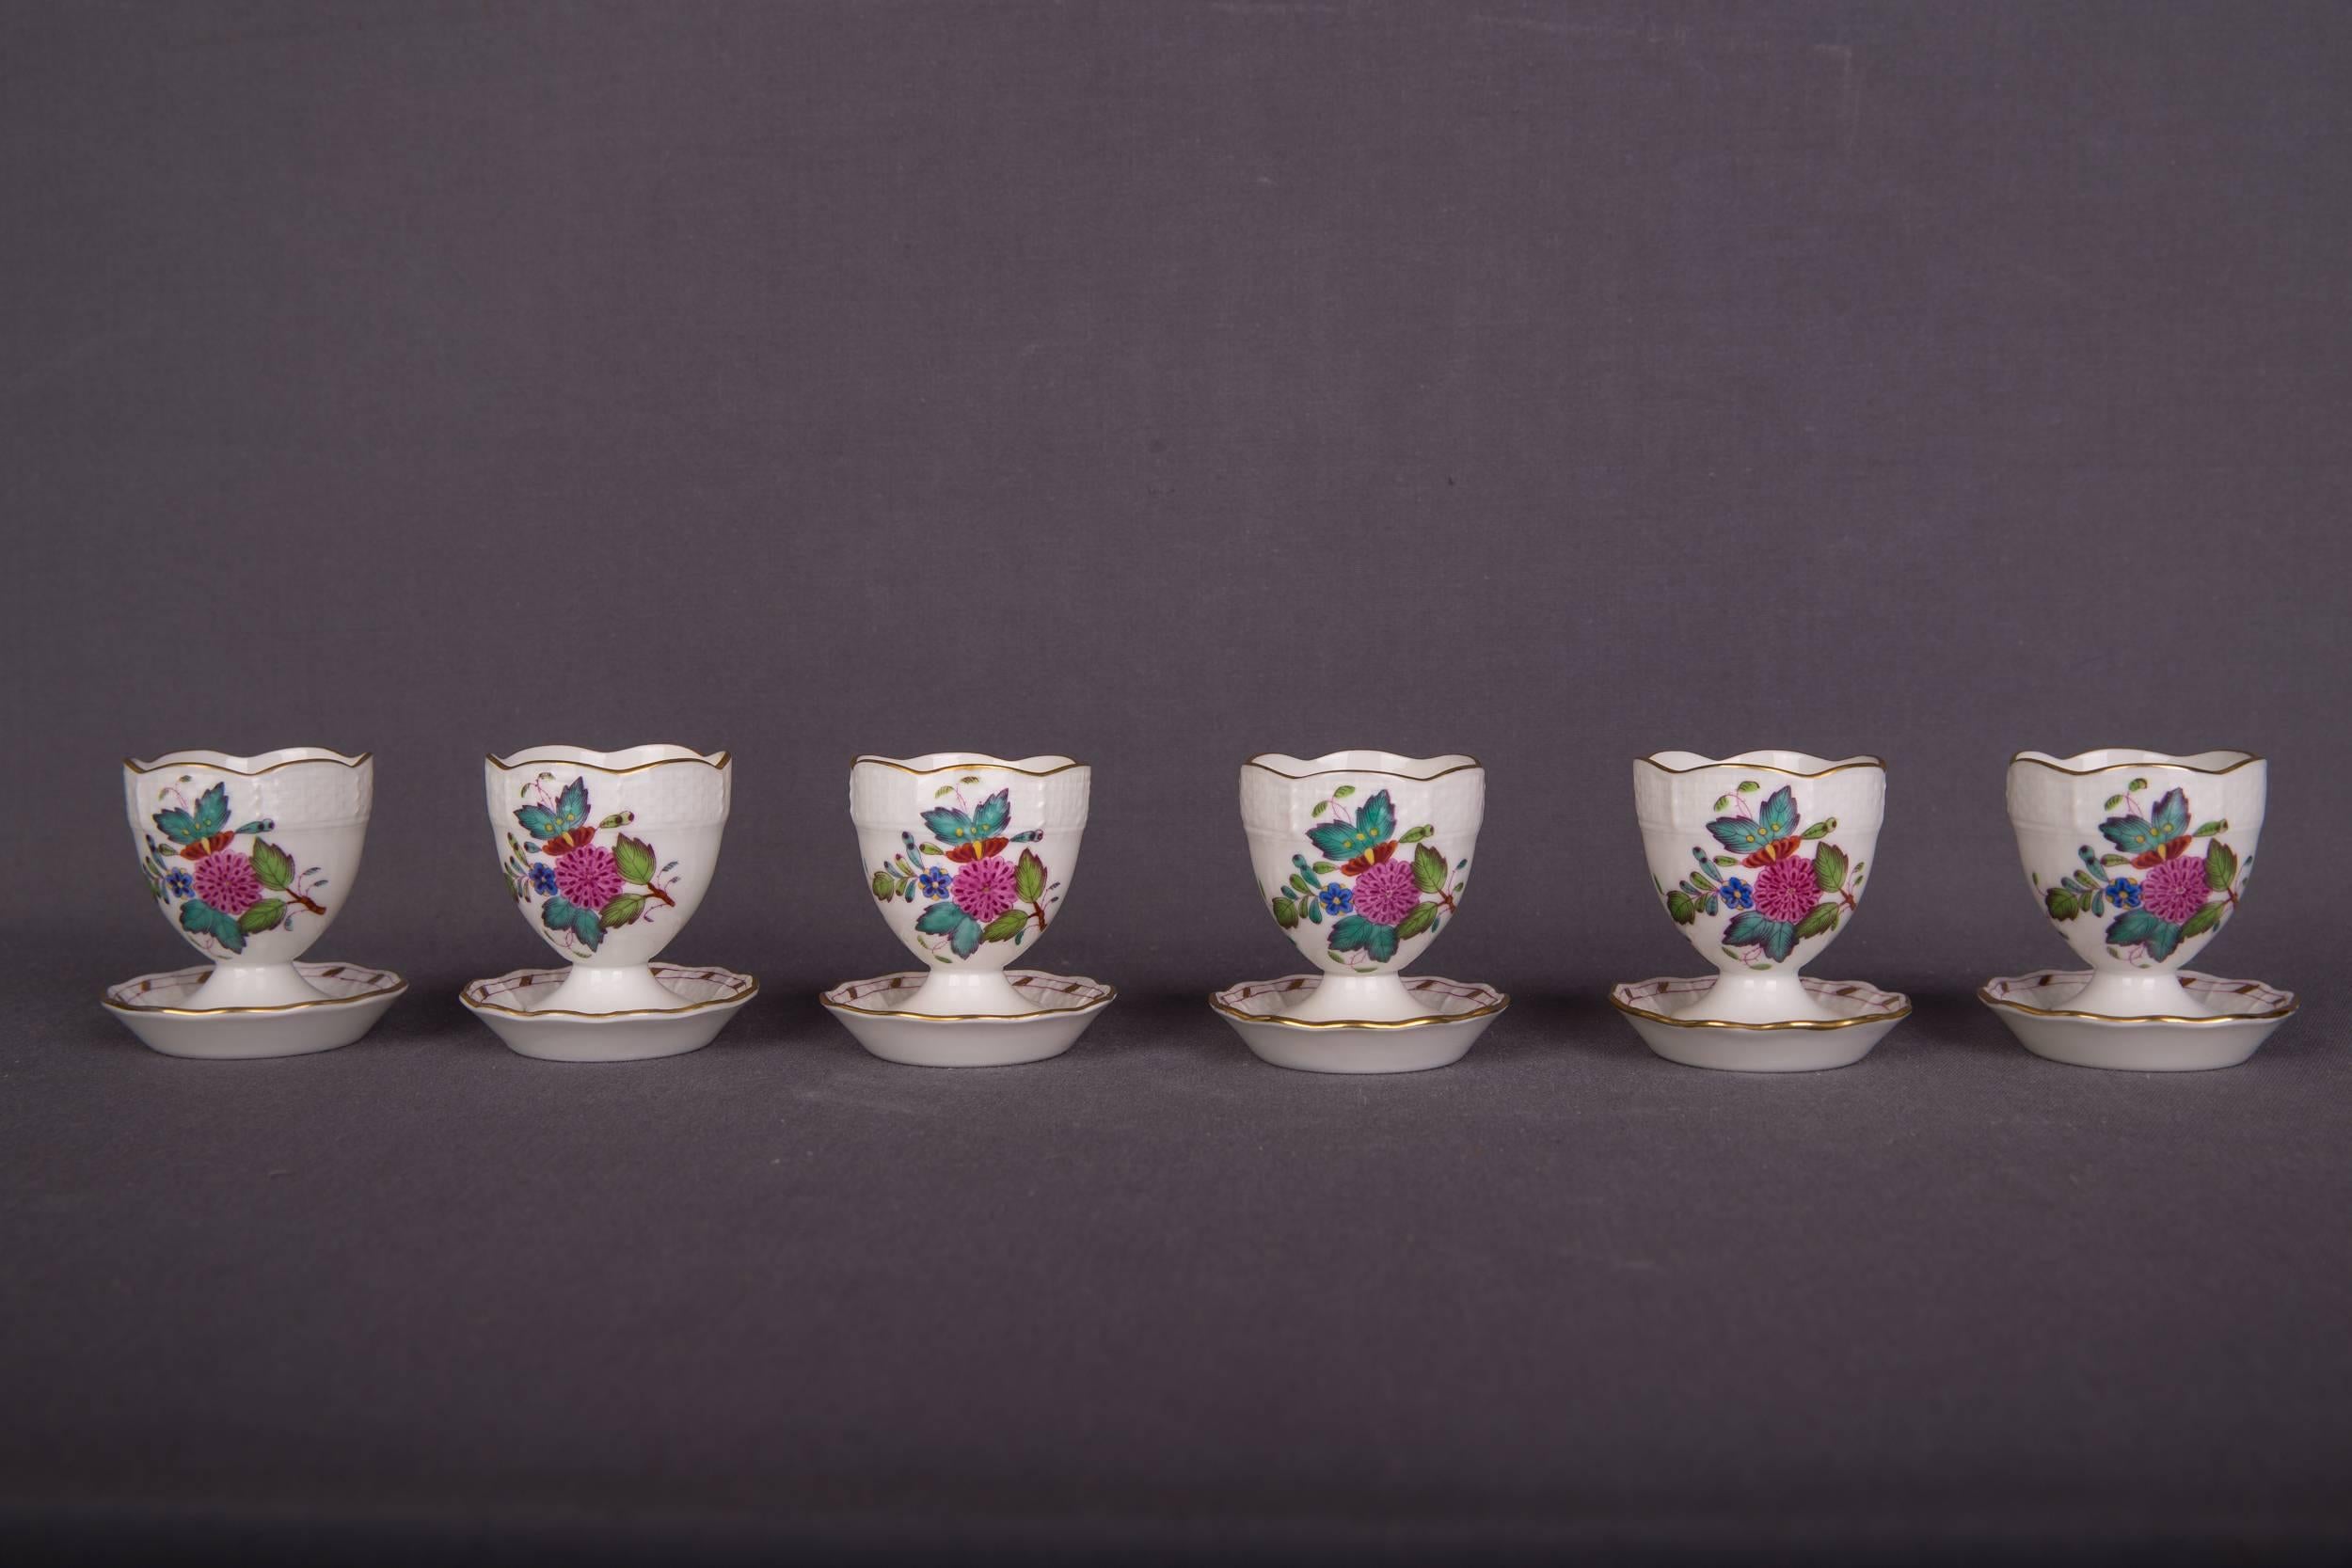 Extensive Rare Herend Dining Service Porcelain with a Lot of Flowers and Gold 2